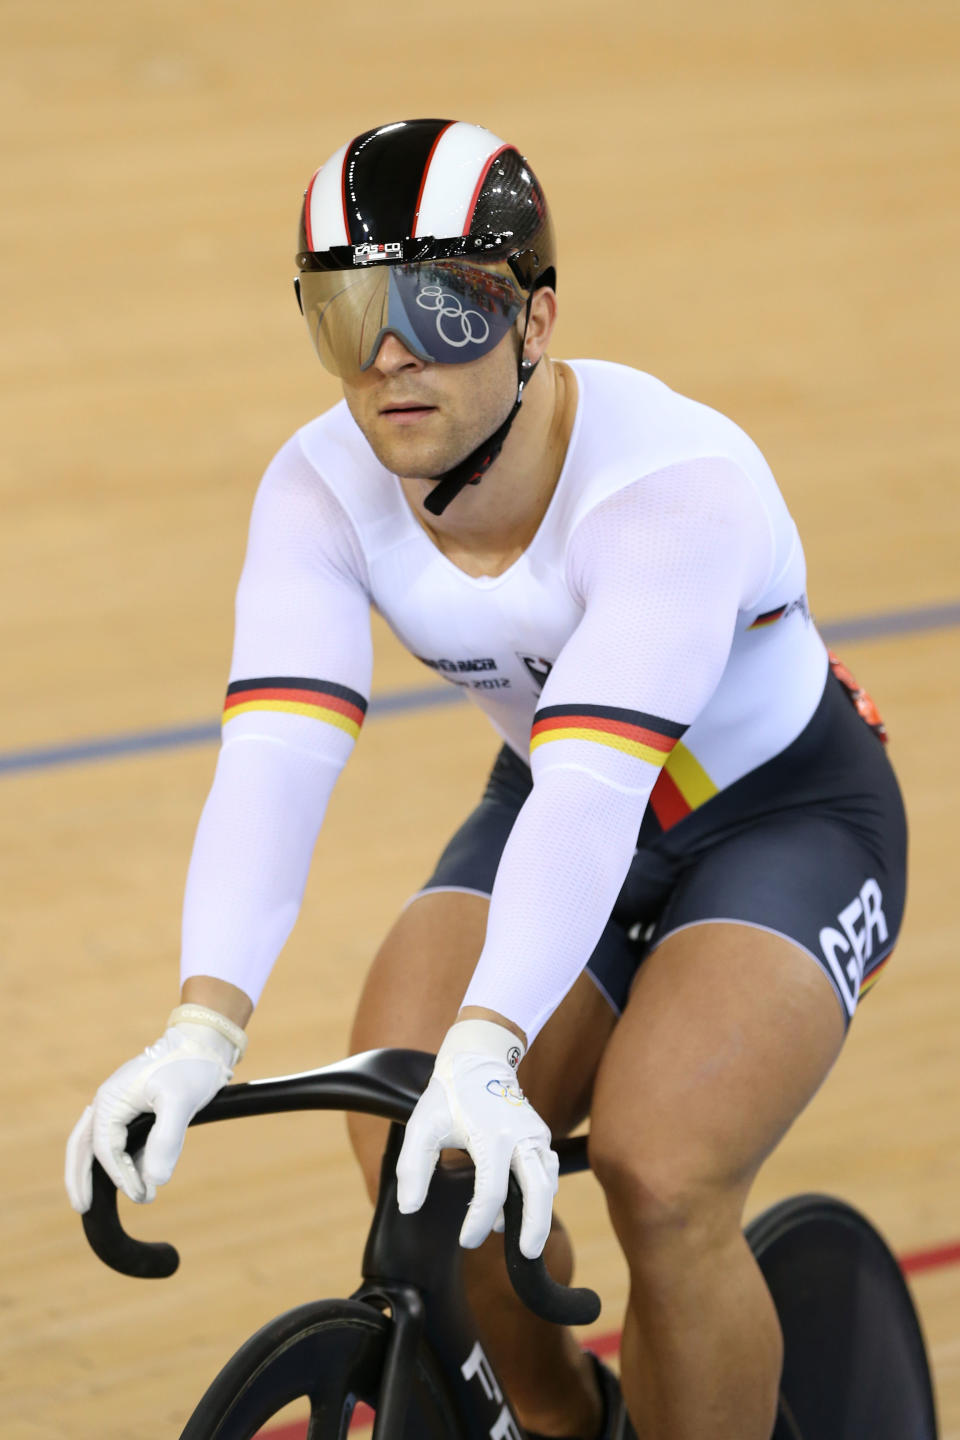 Robert Forstemann of Germany after beating Bernard Esterhuizen of South Africa during the Men's Sprint Track Cycling 1/16 Finals on Day 8 of the London 2012 Olympic Games at Velodrome on August 4, 2012 in London, England. (Getty Images)